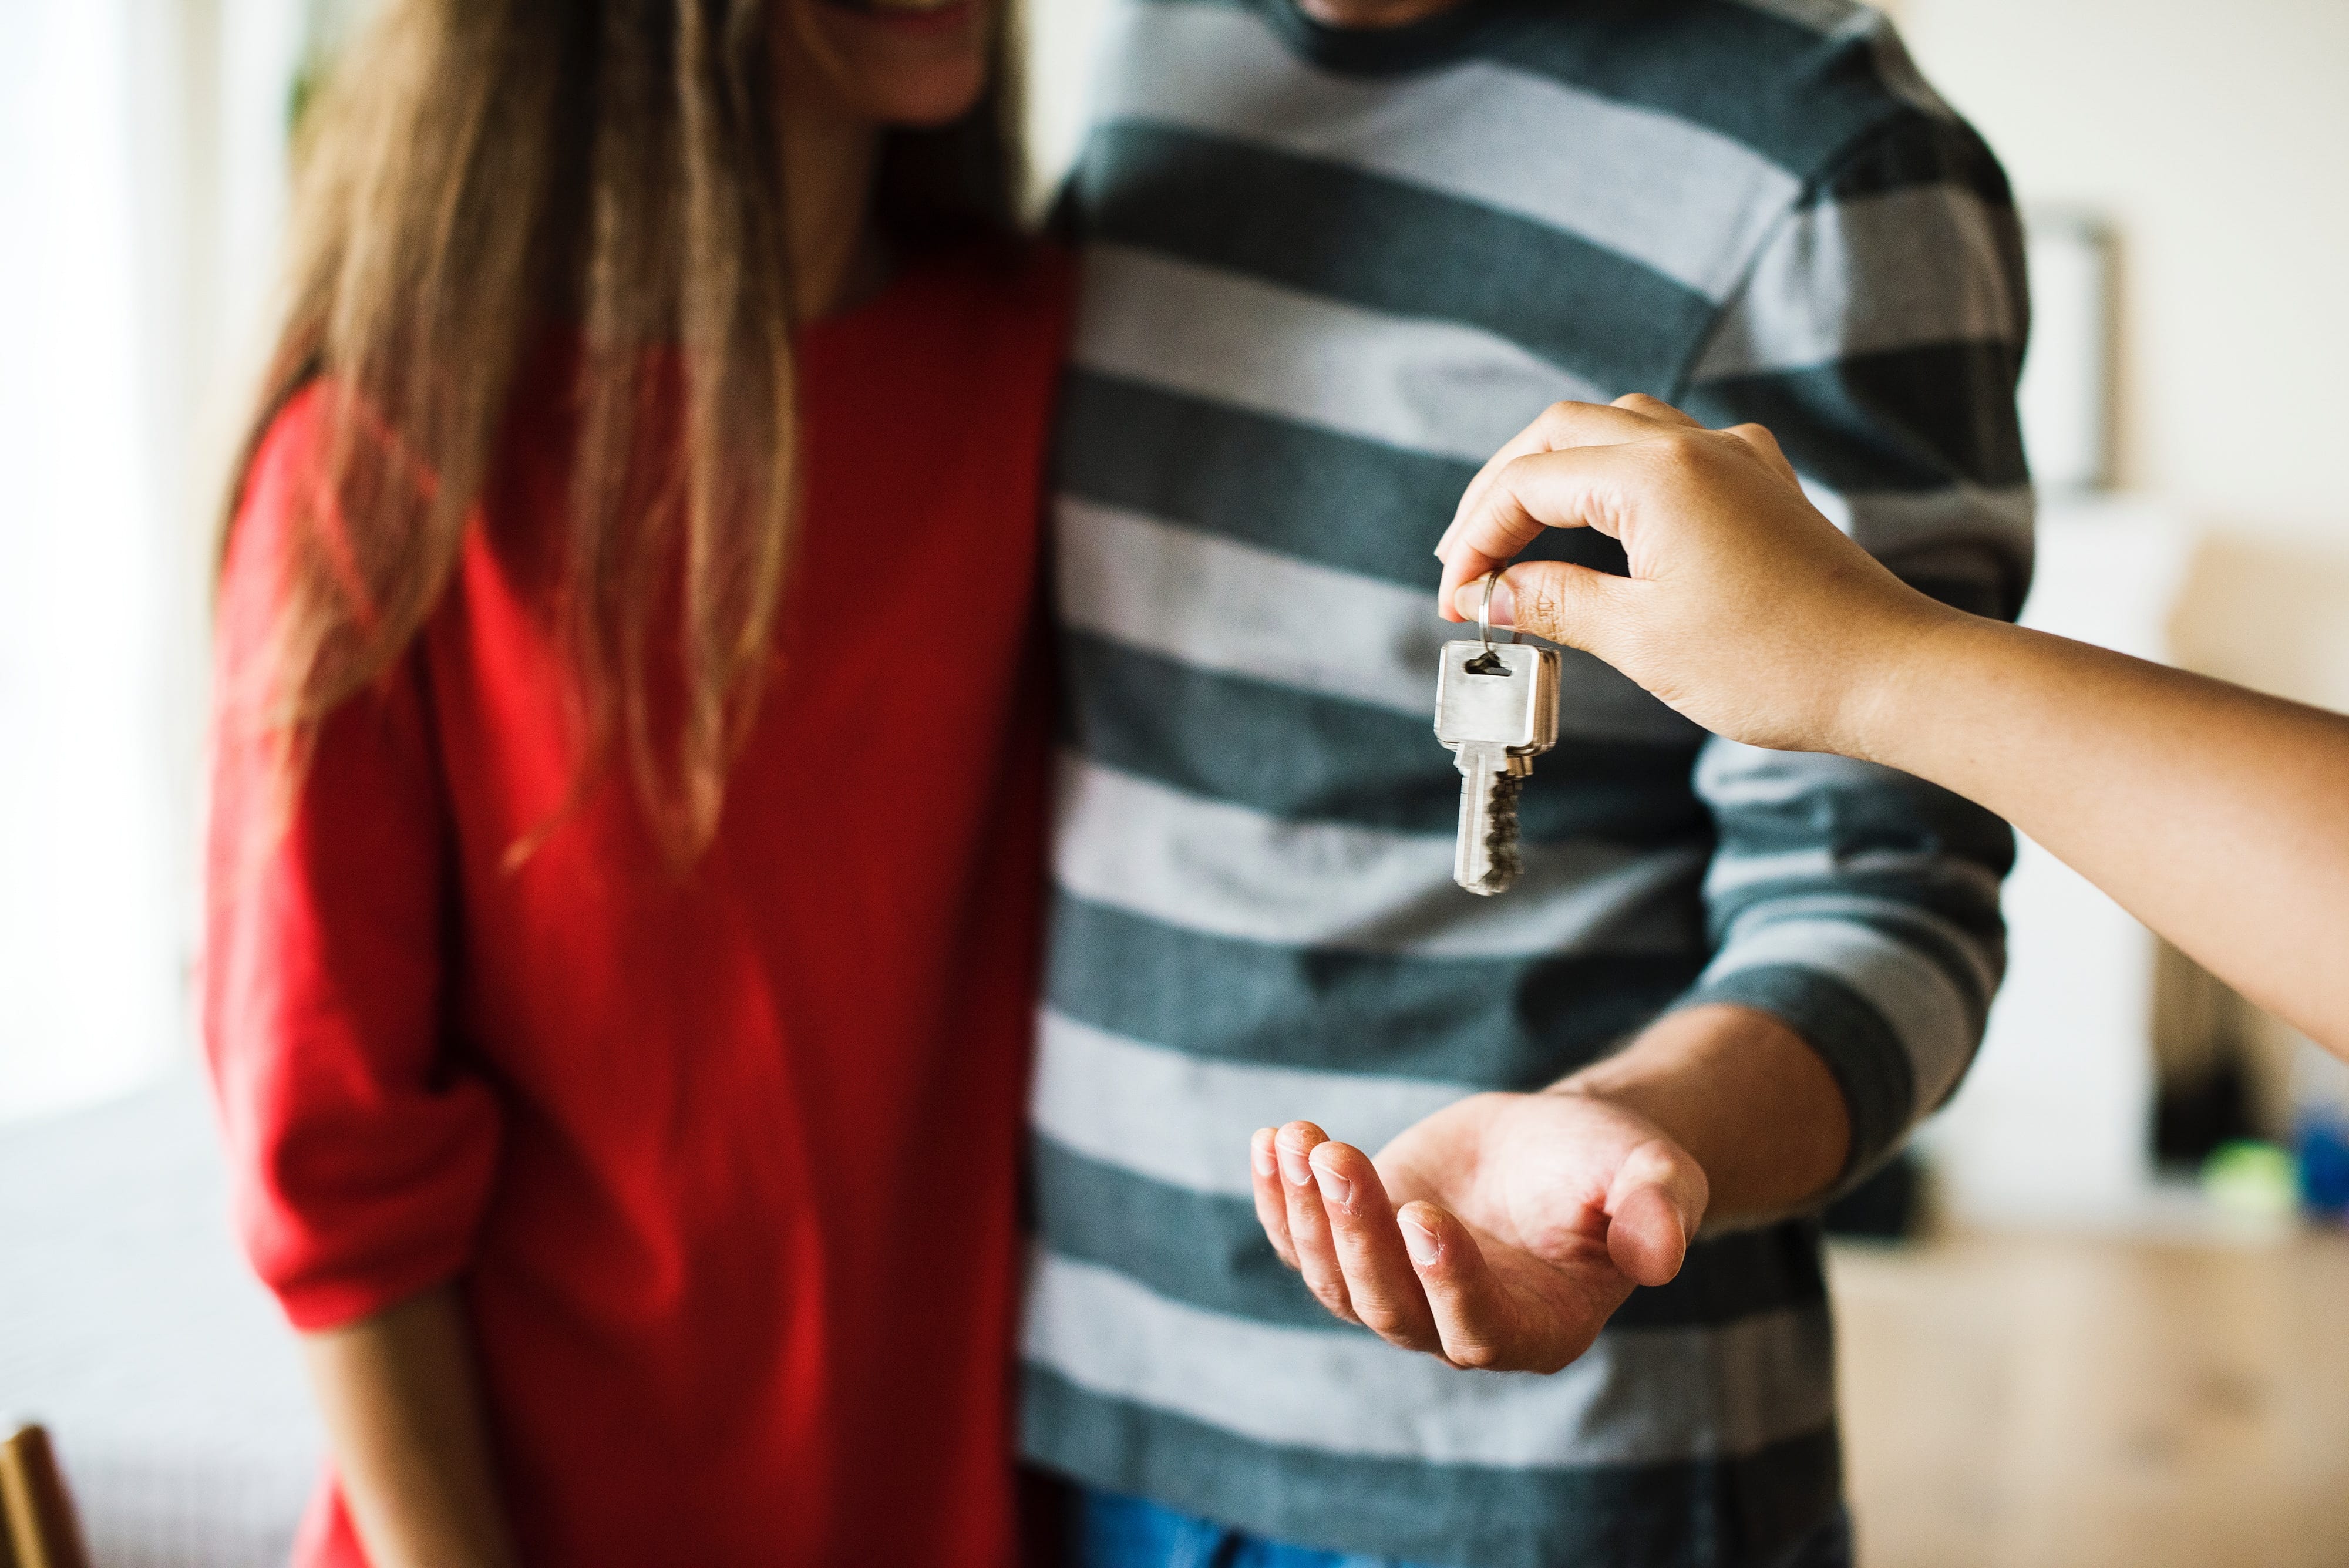 Man and woman being handed keys to a new home; image by Rawpixel, via Unsplash.com.